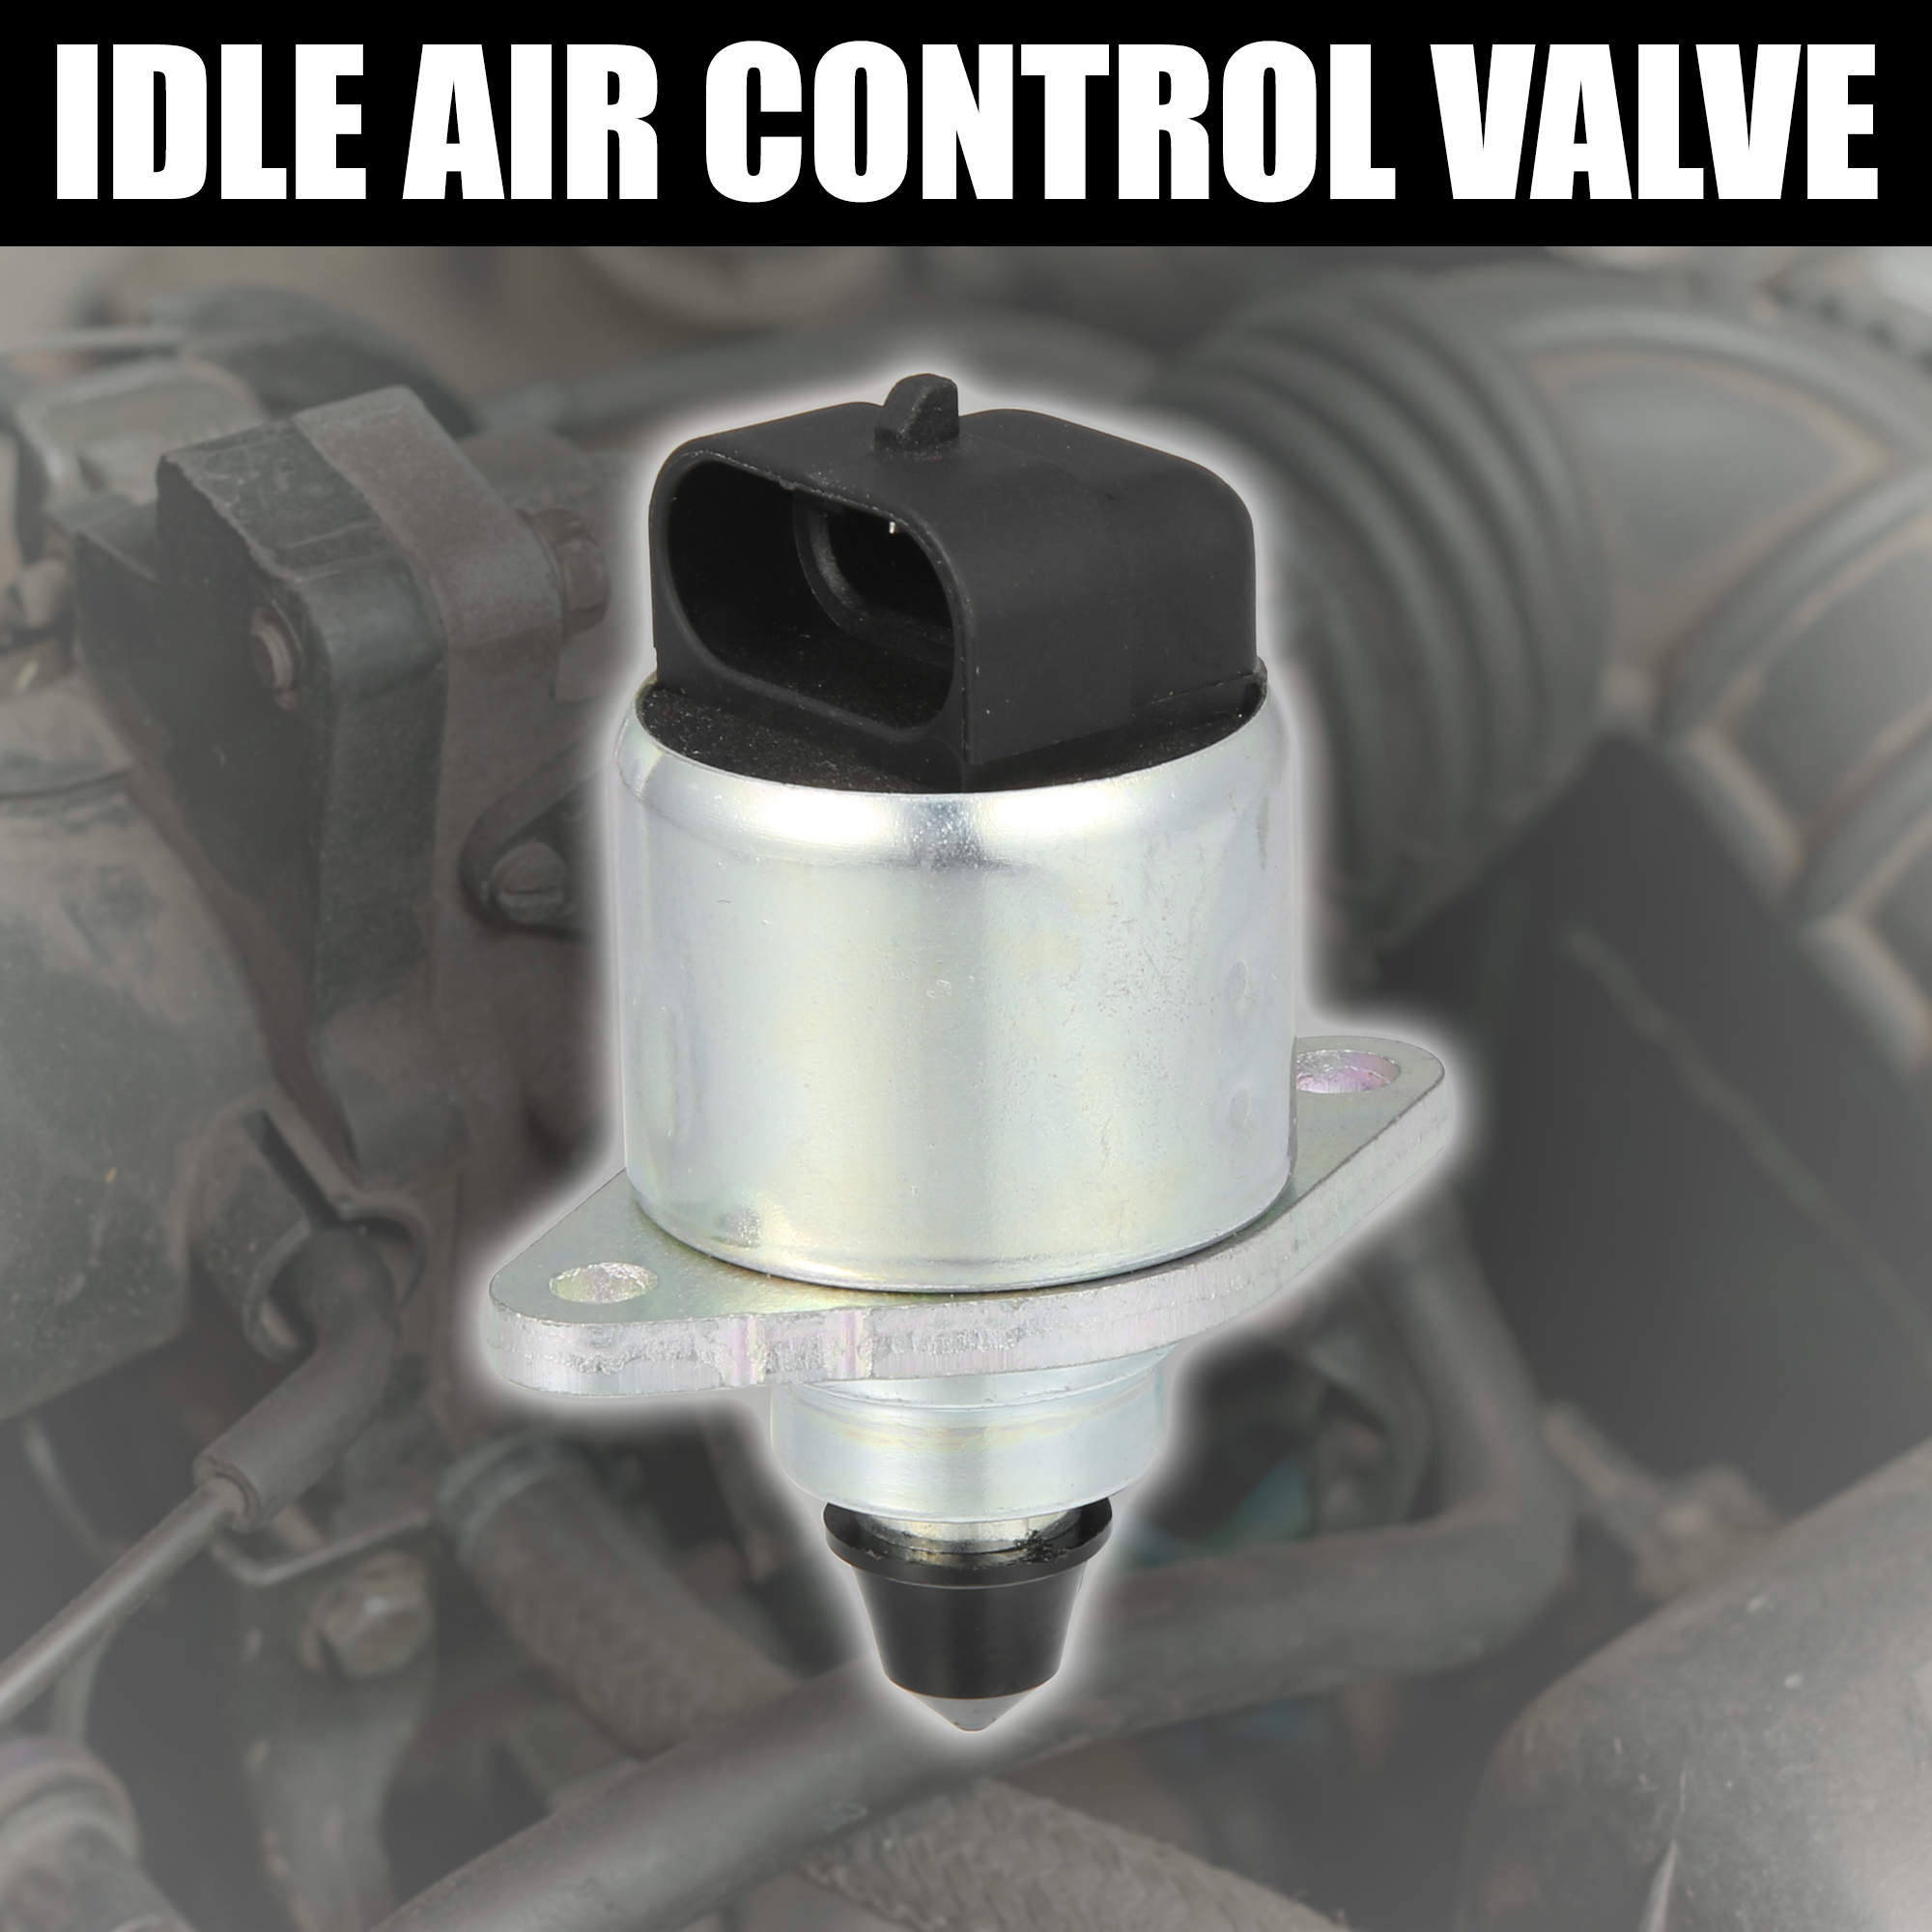 Car Idle Air Control Valve 96966721 96966710 96958412 with Gaskets for Chevy Spark M300 1.0L Silver Tone - image 2 of 6